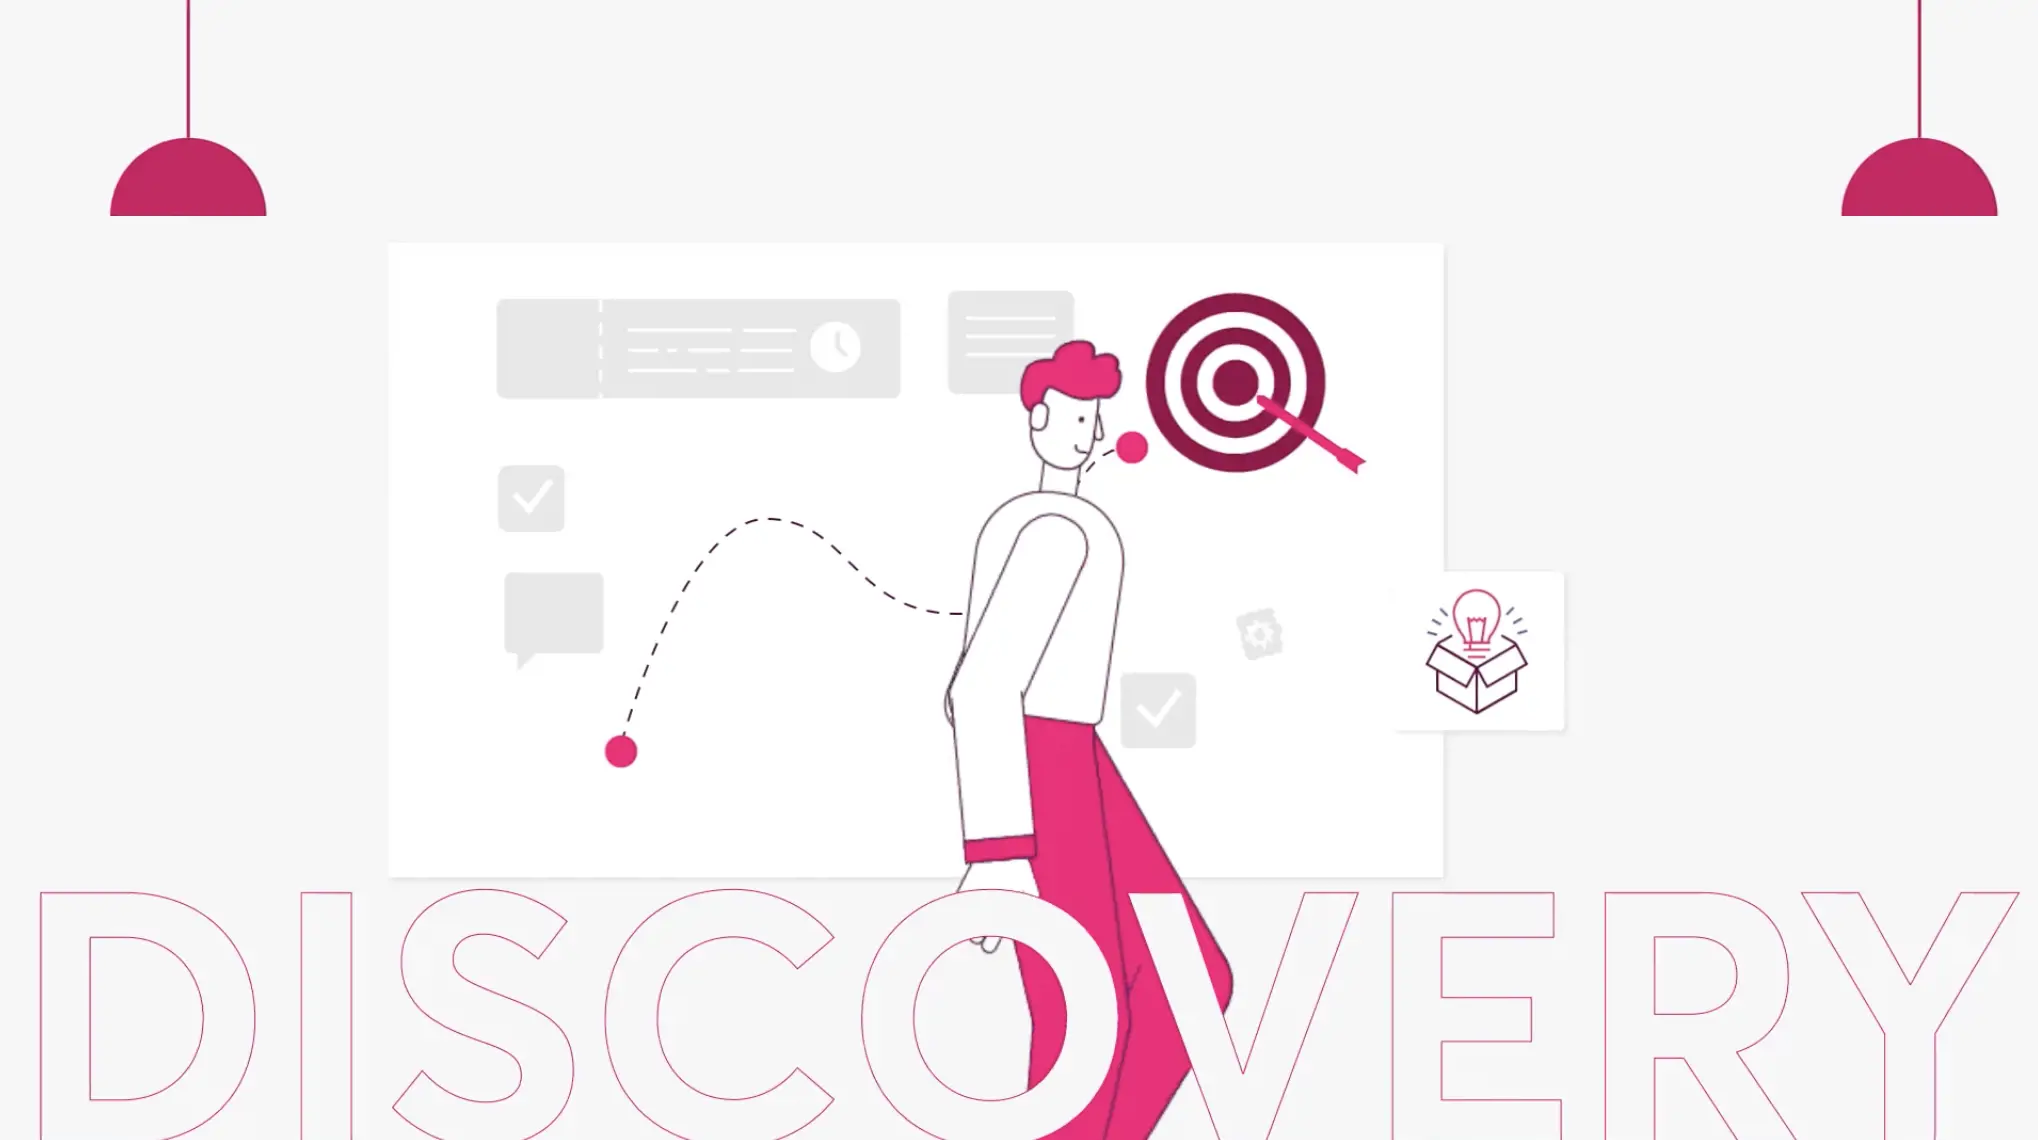 Cartoon illustration of a man looking at a target, with various UI elements and the word "DISCOVERY" below.